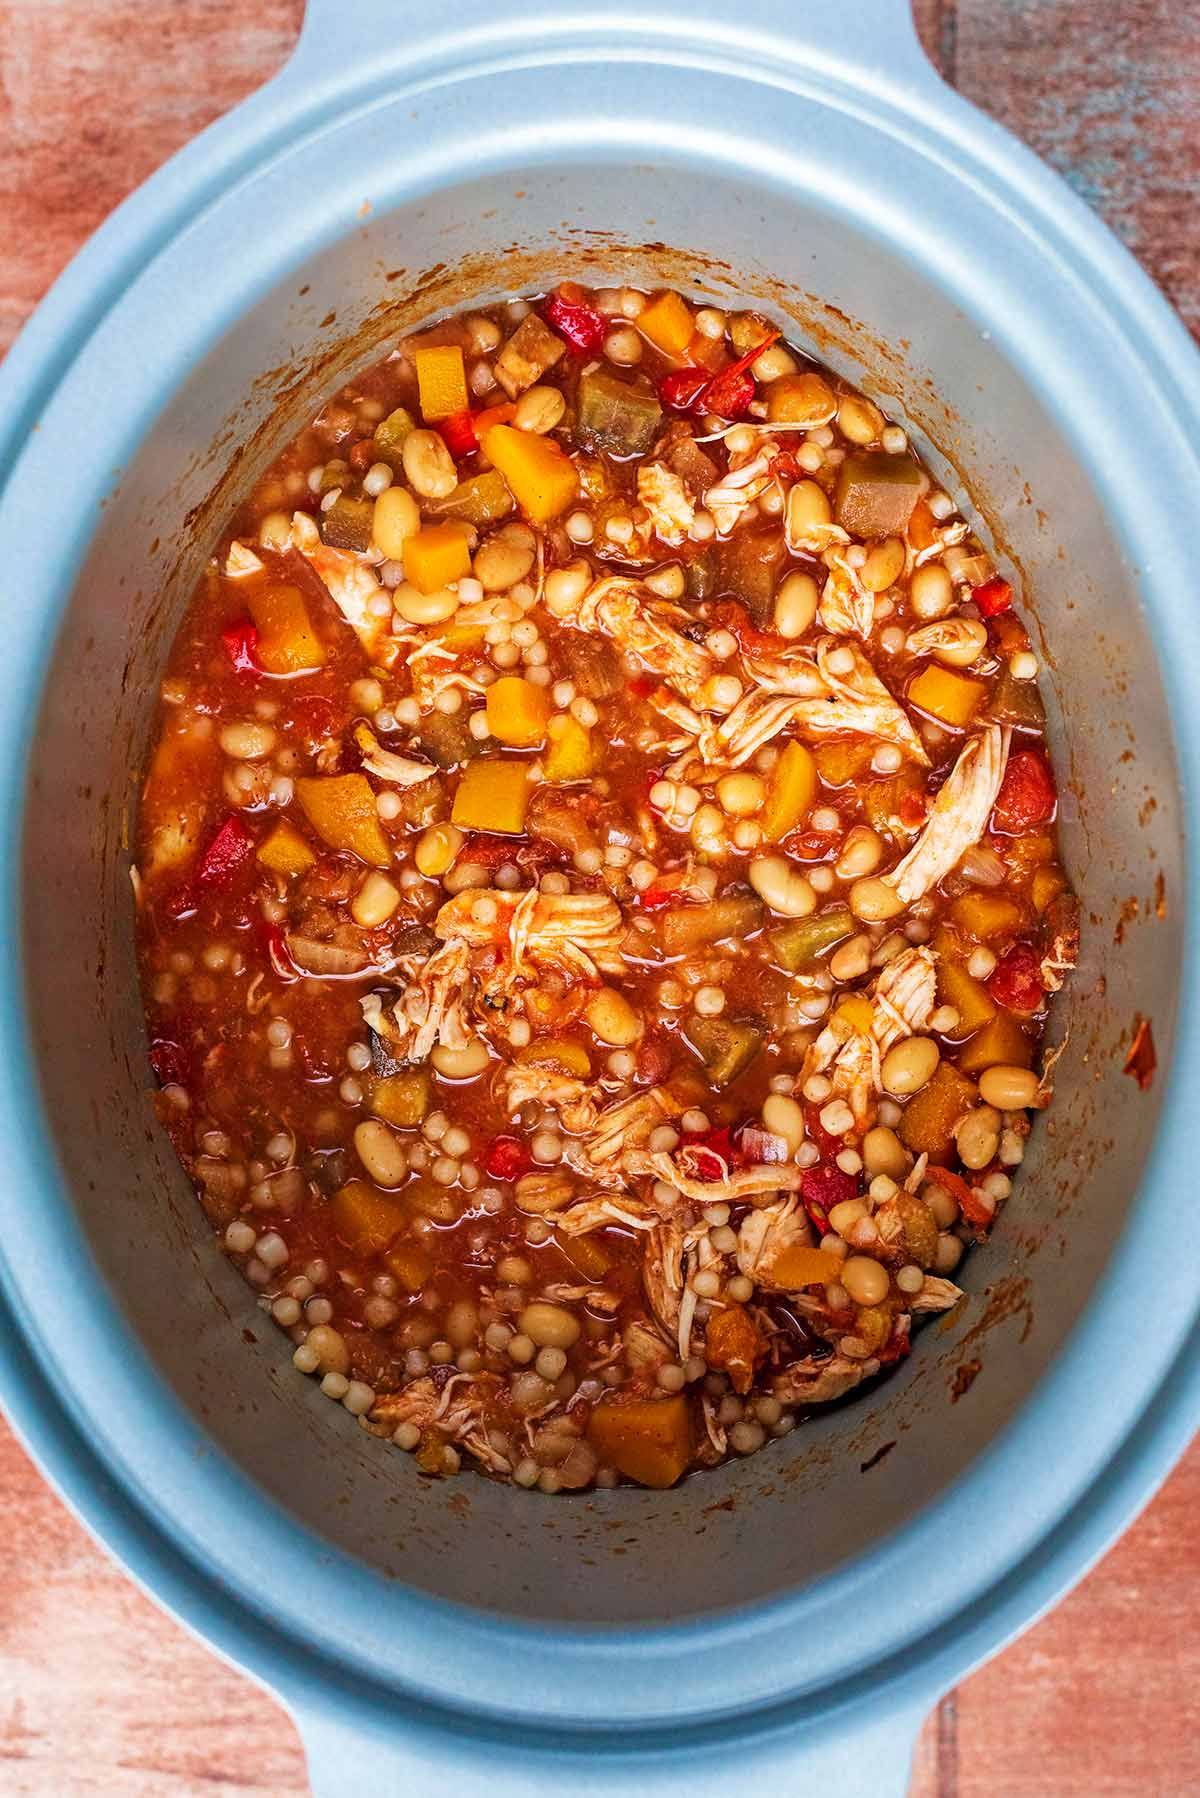 A slow cooker bowl containing shredded chicken, chopped vegetables, beans and couscous.